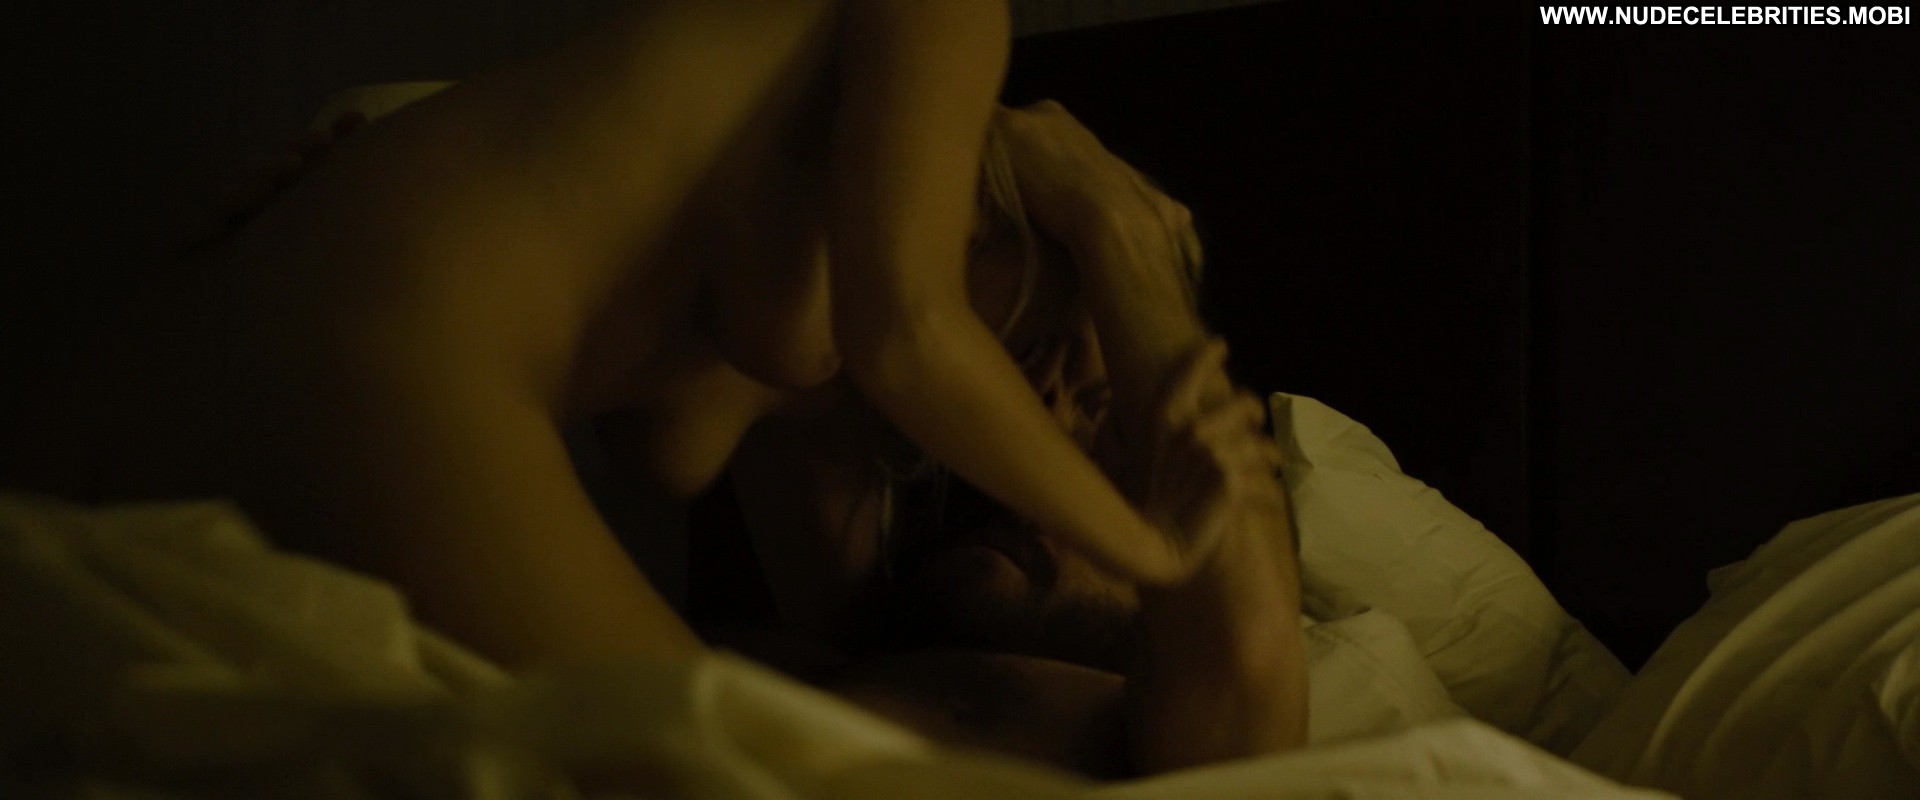 Enemy Melanie Laurent Ass Breasts Bed Pregnant Celebrity.